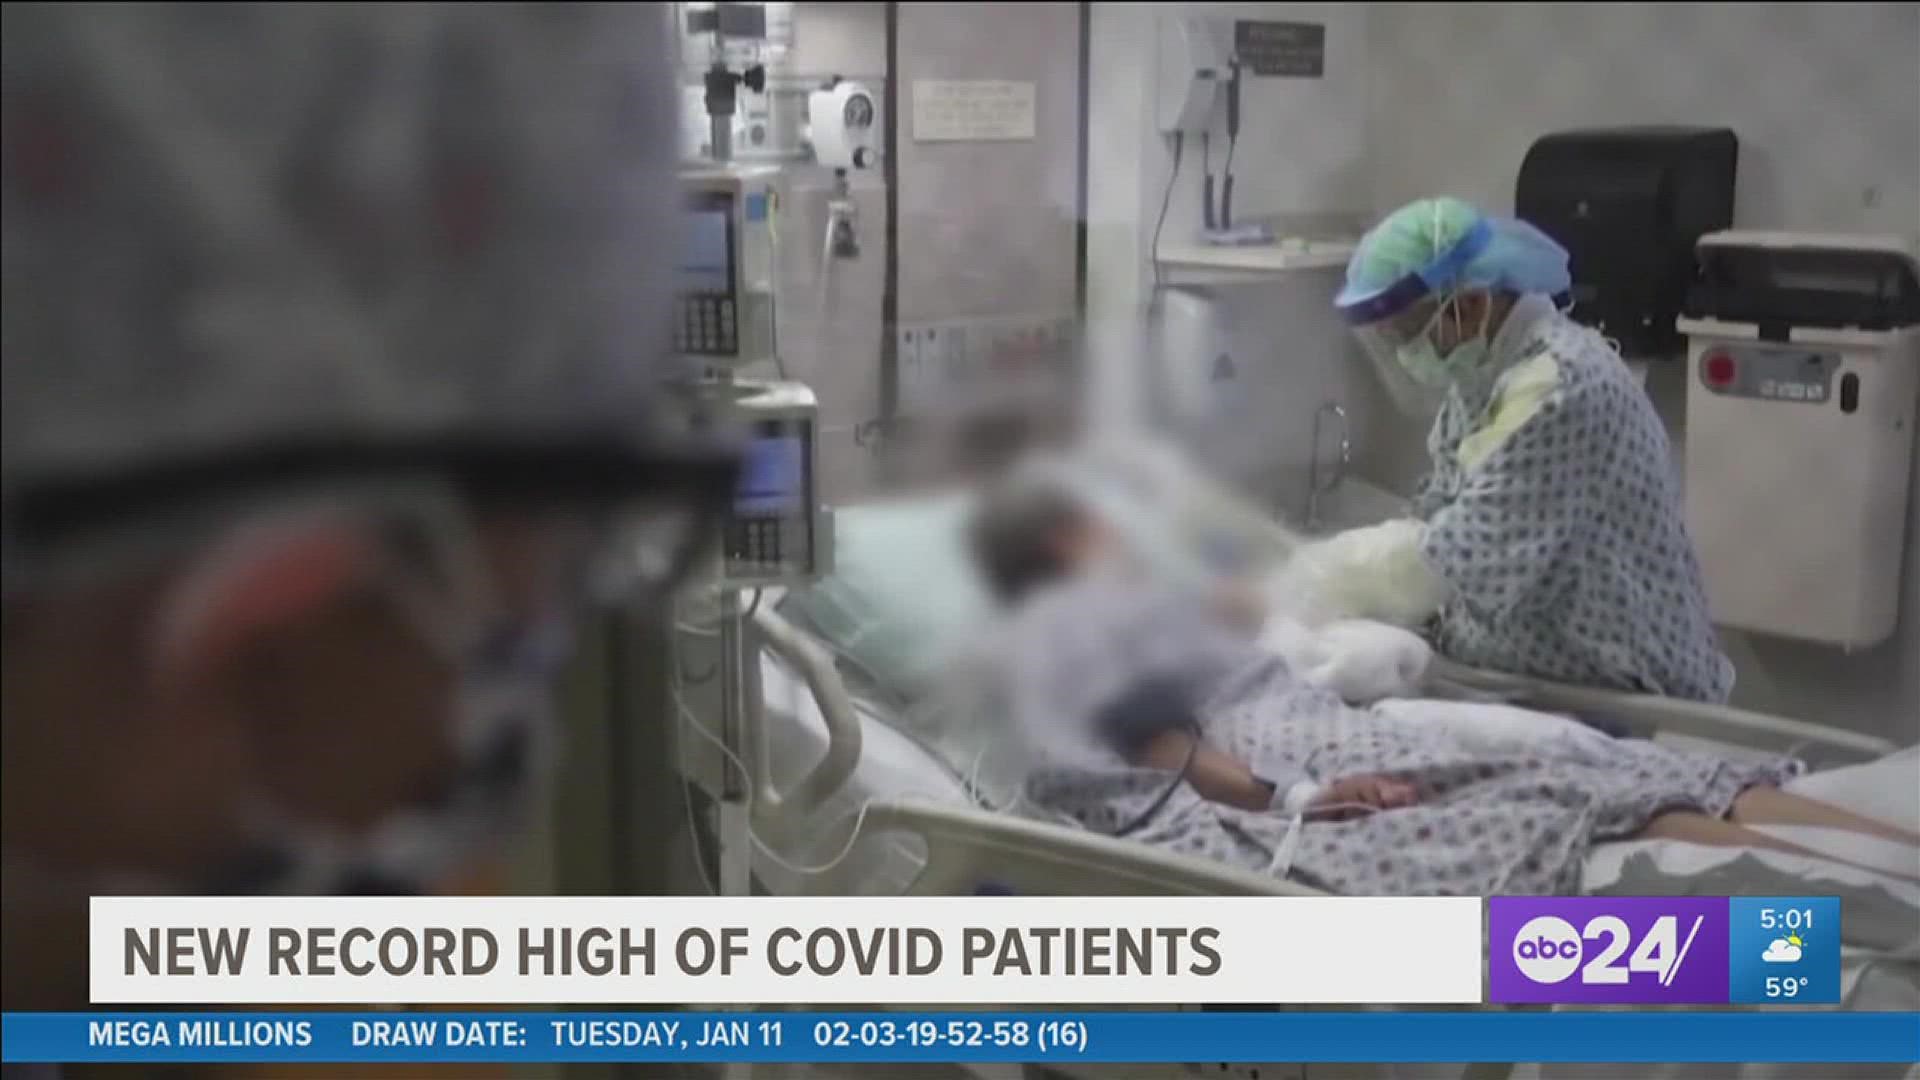 The 770 hospitalized with COVID as of Thursday exceeded the previous record of 721, set in September during Delta surge.